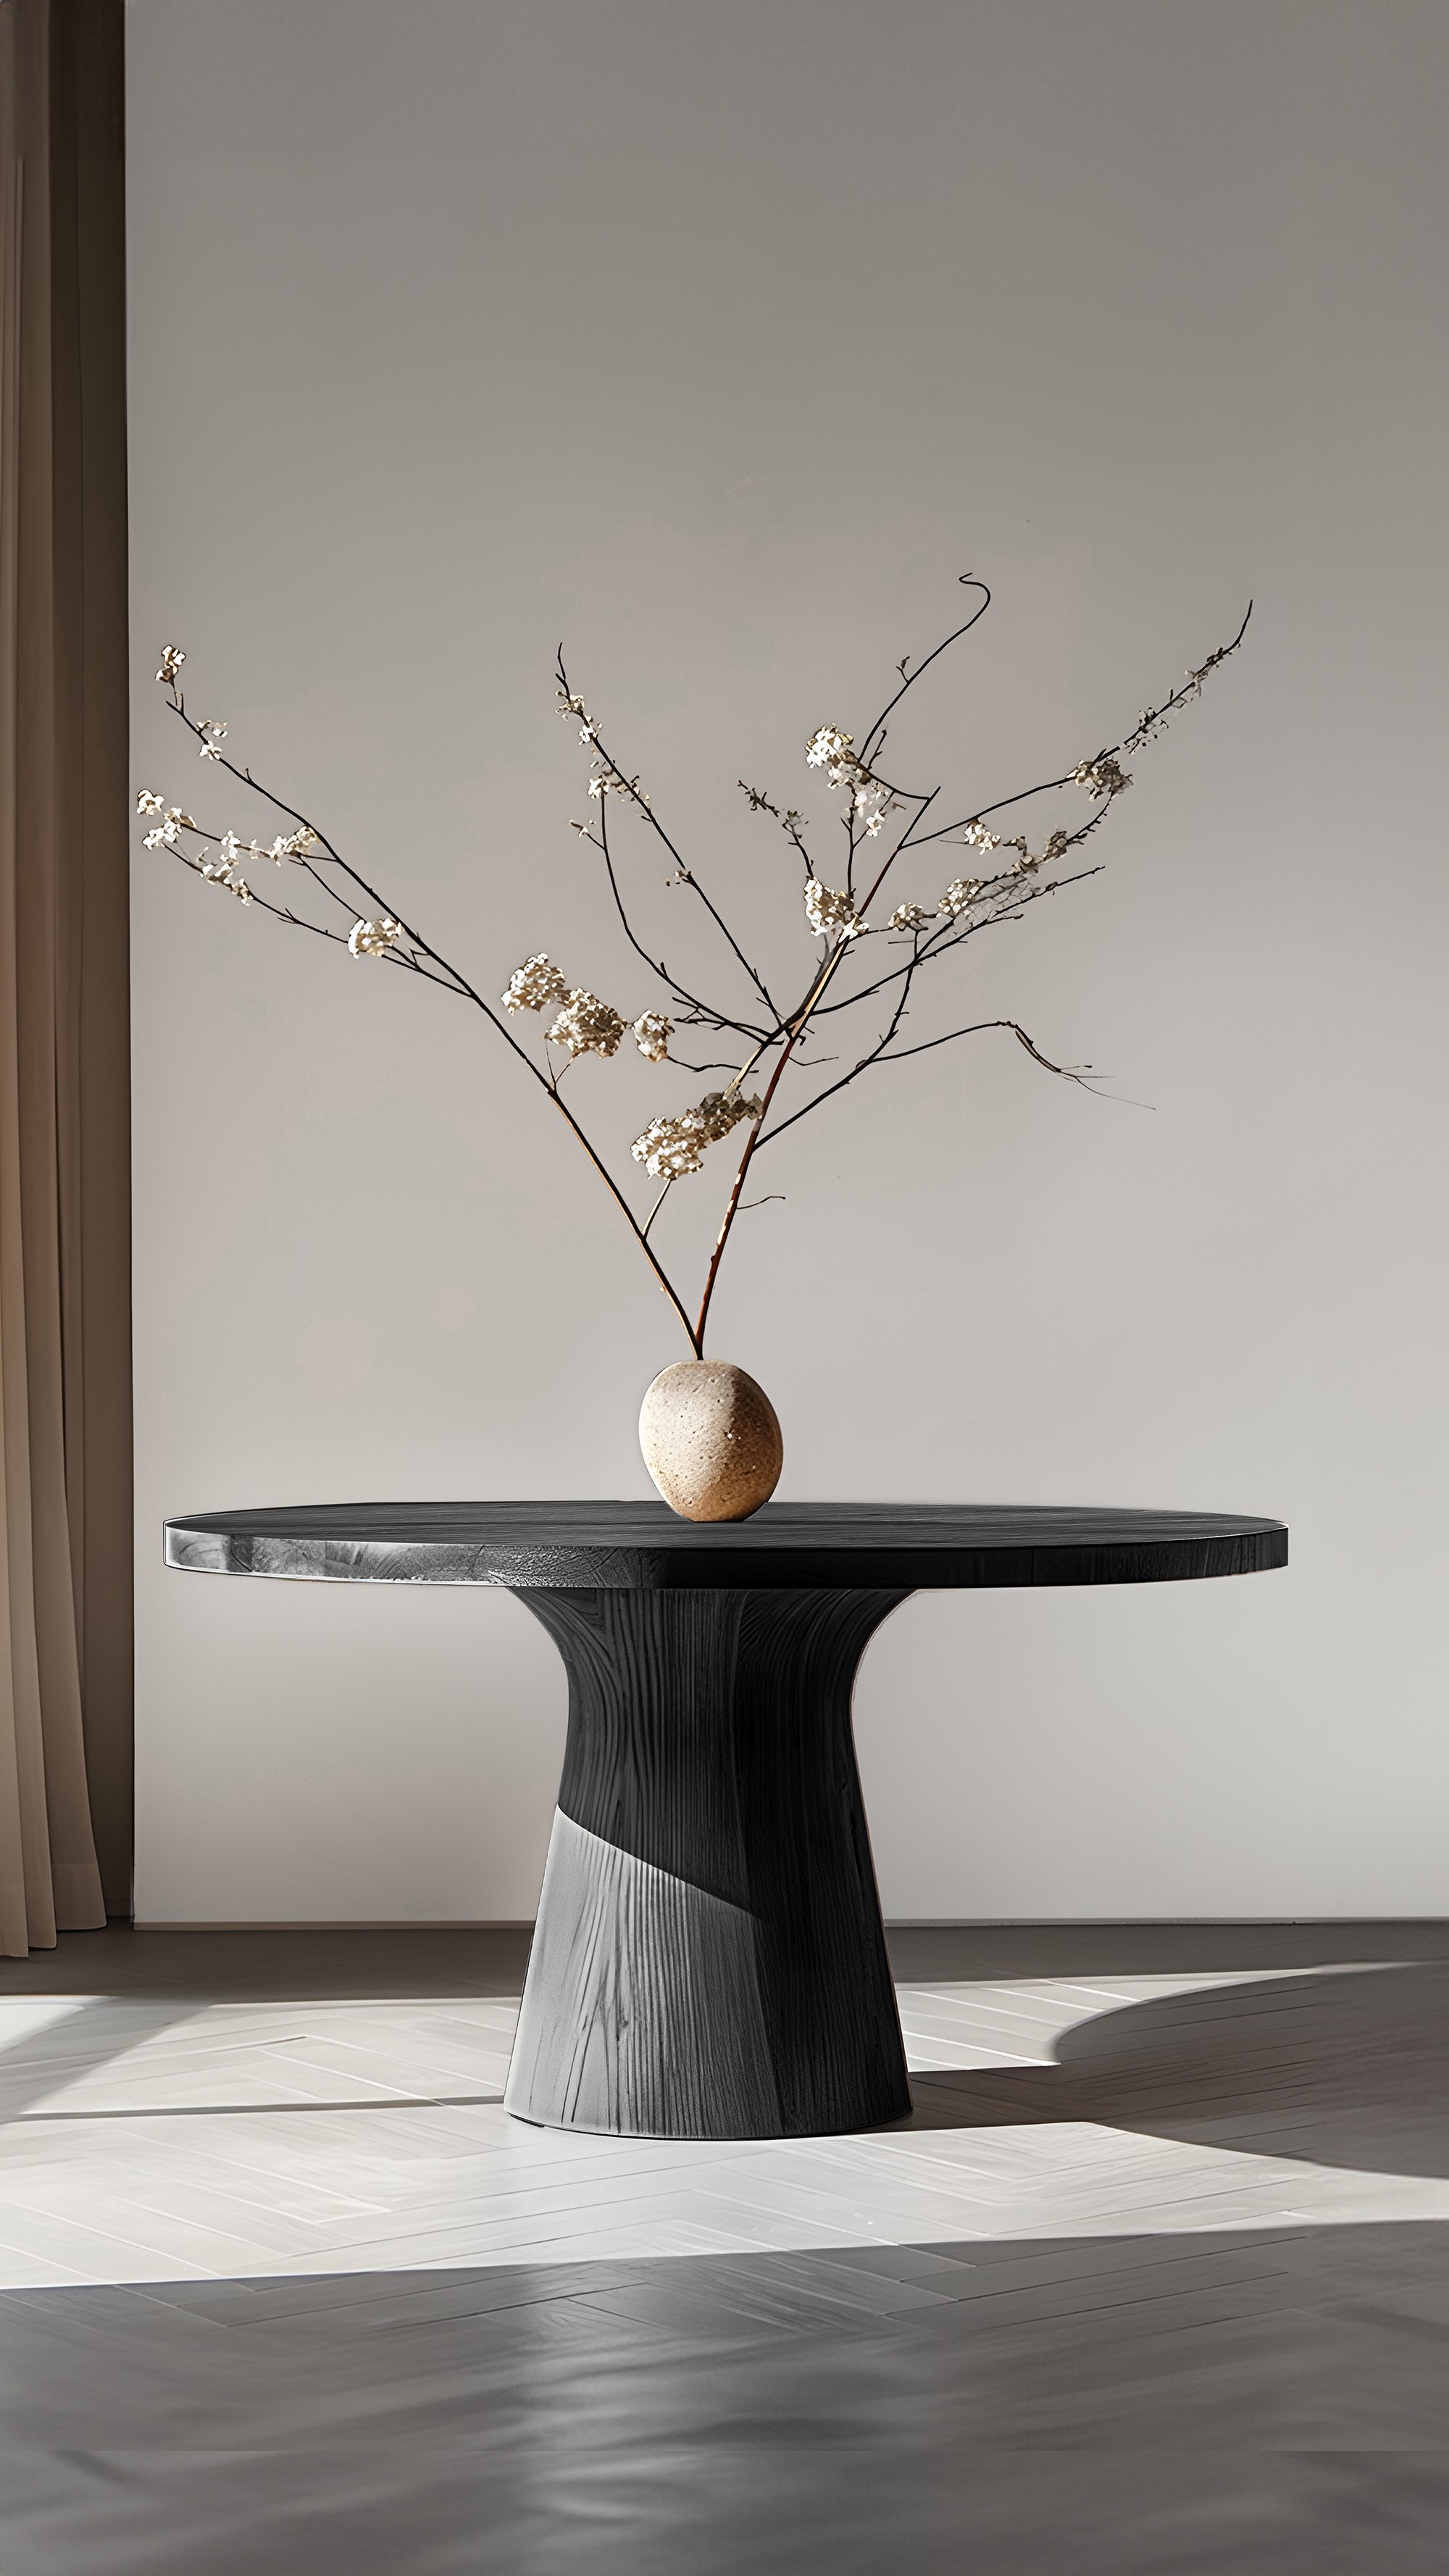 NONO's Socle Series No03, Cocktail Tables with a Black Wooden Twist - 7.jpg